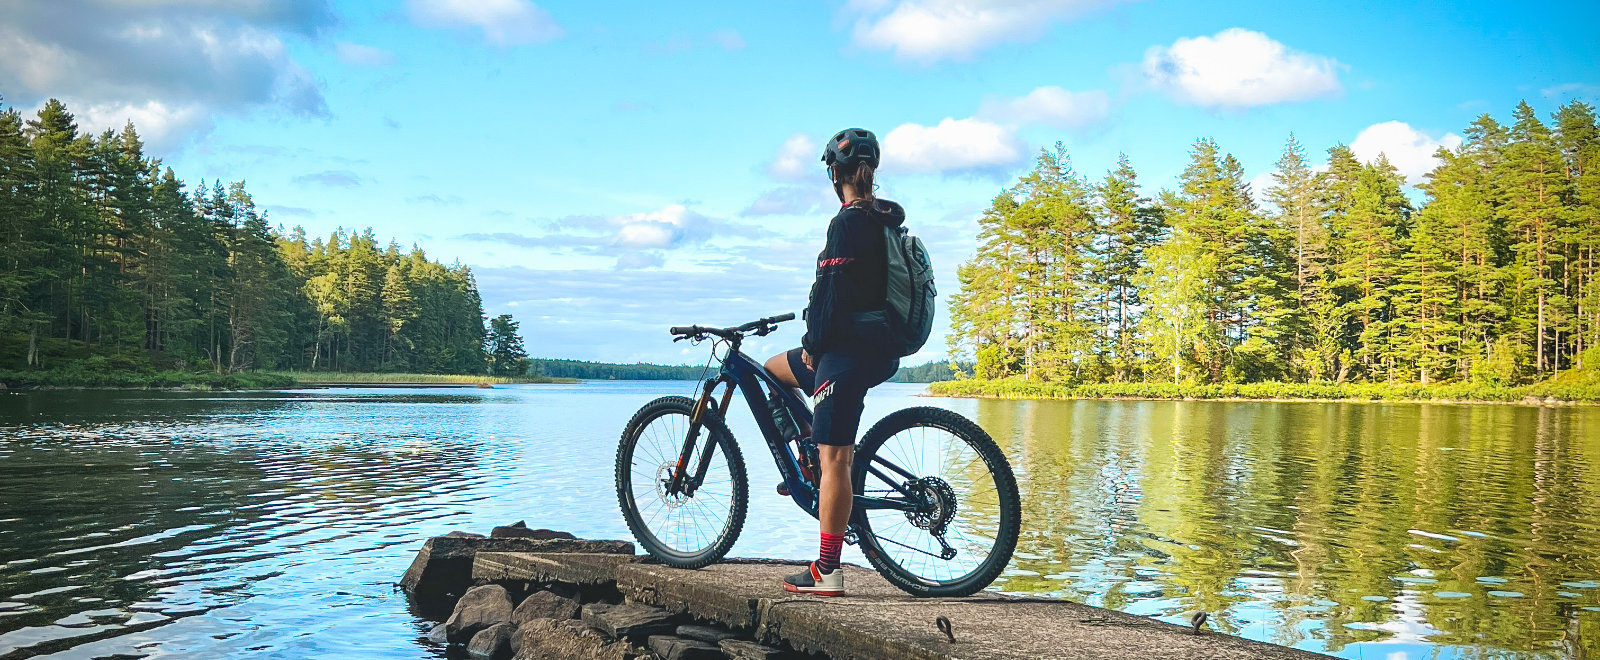 Steffi Marth stands on the jetty in Sweden with e-bike